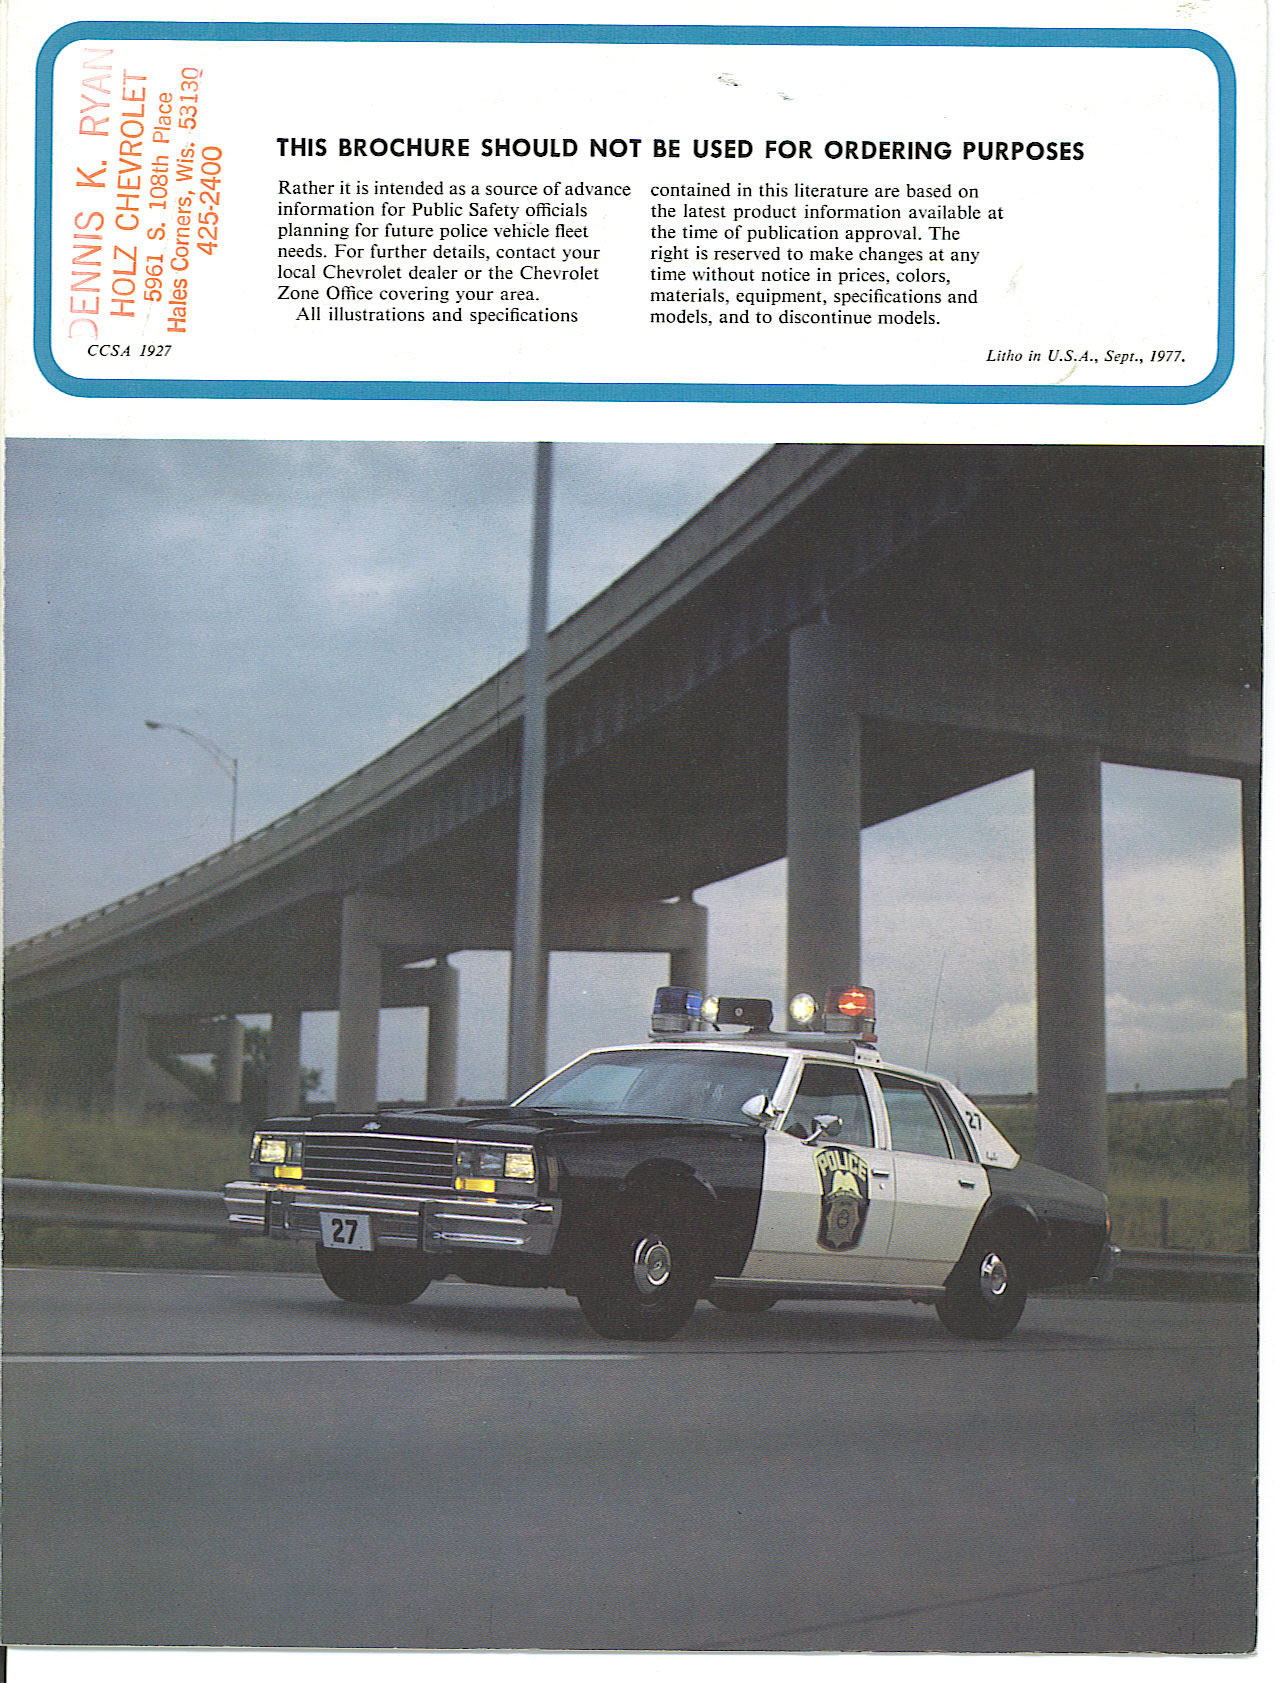 1978 Chevrolet Police Vehicles Brochure Page 5